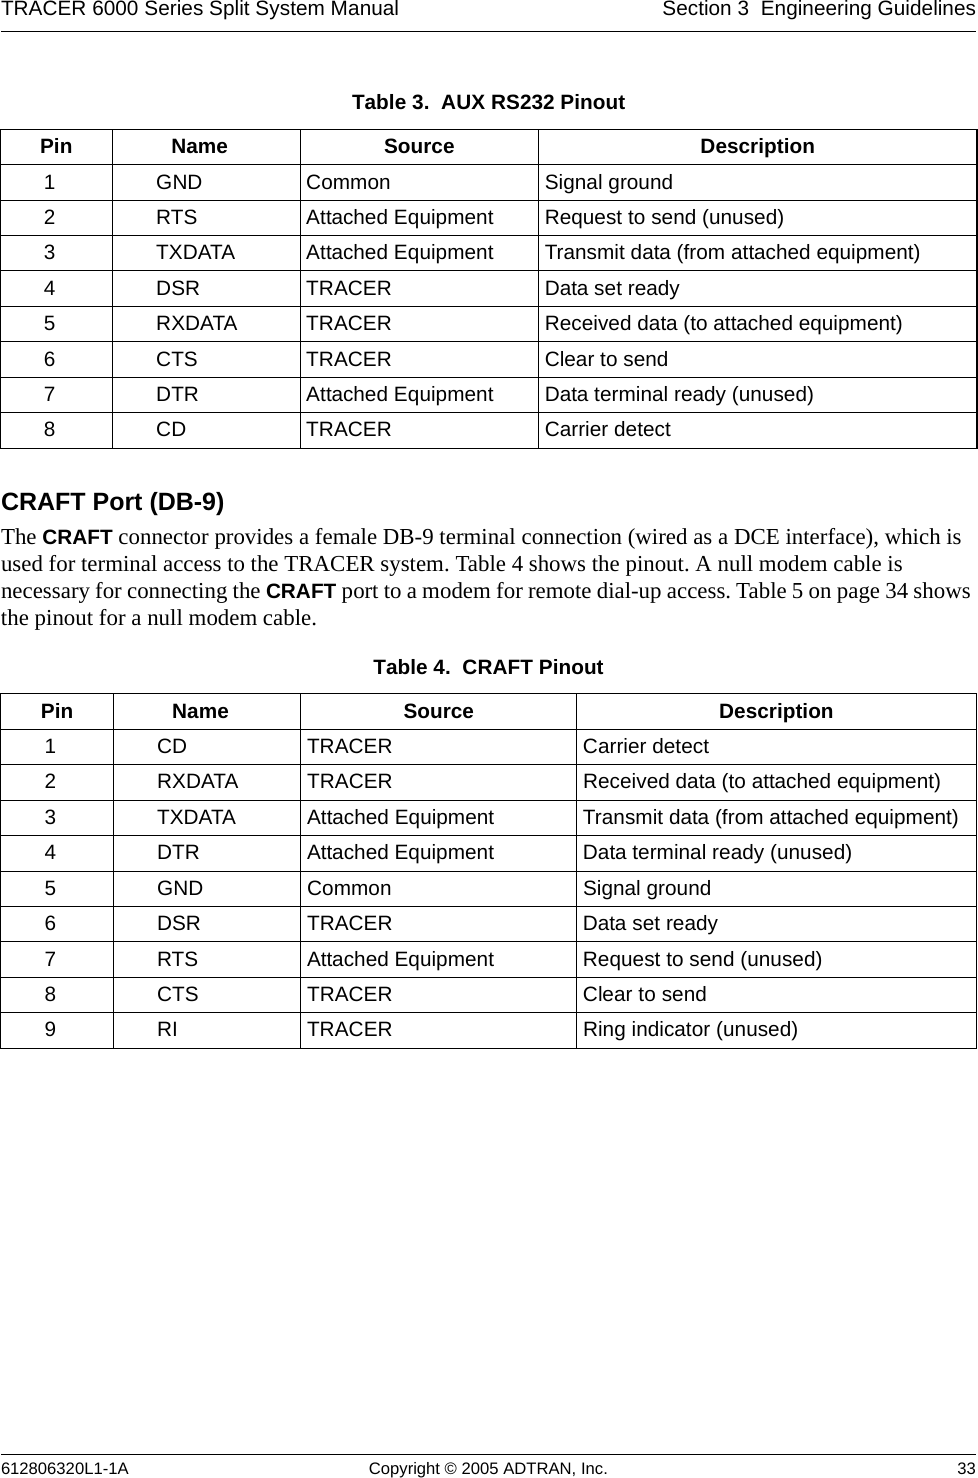 TRACER 6000 Series Split System Manual Section 3  Engineering Guidelines612806320L1-1A Copyright © 2005 ADTRAN, Inc. 33CRAFT Port (DB-9) The CRAFT connector provides a female DB-9 terminal connection (wired as a DCE interface), which is used for terminal access to the TRACER system. Table 4 shows the pinout. A null modem cable is necessary for connecting the CRAFT port to a modem for remote dial-up access. Table 5 on page 34 shows the pinout for a null modem cable.Table 3.  AUX RS232 Pinout Pin Name Source Description1GNDCommon Signal ground2RTS Attached Equipment Request to send (unused)3TXDATAAttached Equipment Transmit data (from attached equipment)4DSR TRACER Data set ready5RXDATATRACER Received data (to attached equipment)6CTS TRACER Clear to send7DTR Attached Equipment Data terminal ready (unused)8CD TRACER Carrier detectTable 4.  CRAFT Pinout Pin Name Source Description1 CD TRACER Carrier detect2 RXDATA TRACER Received data (to attached equipment)3 TXDATA Attached Equipment Transmit data (from attached equipment)4 DTR Attached Equipment Data terminal ready (unused)5 GND Common Signal ground6 DSR TRACER Data set ready7 RTS Attached Equipment Request to send (unused)8 CTS TRACER Clear to send9 RI TRACER Ring indicator (unused)